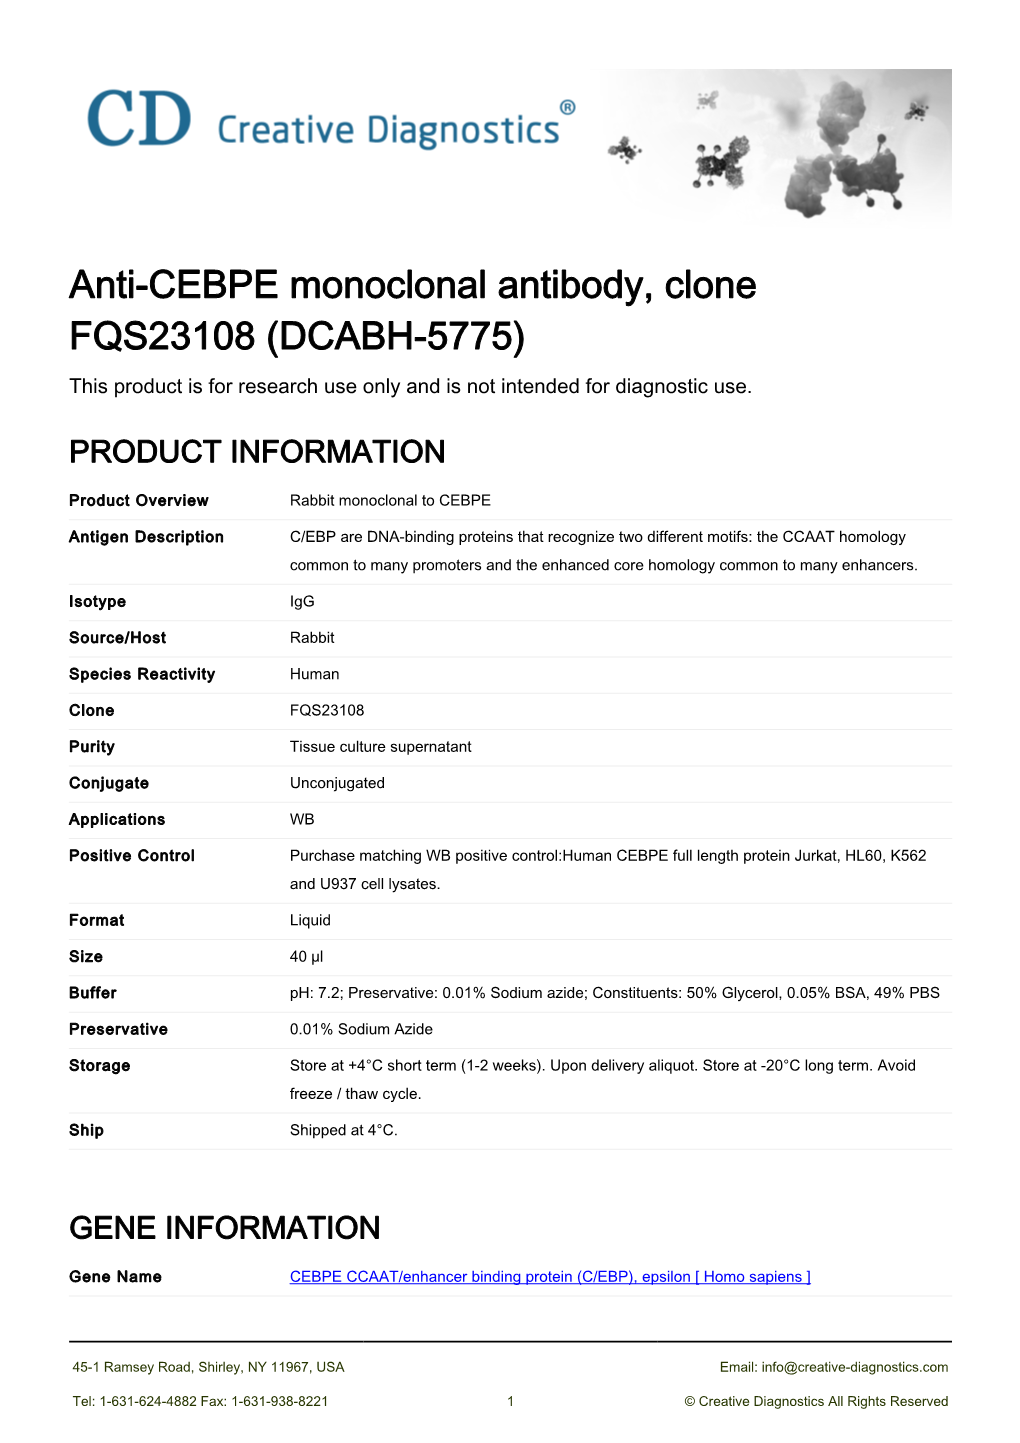 Anti-CEBPE Monoclonal Antibody, Clone FQS23108 (DCABH-5775) This Product Is for Research Use Only and Is Not Intended for Diagnostic Use